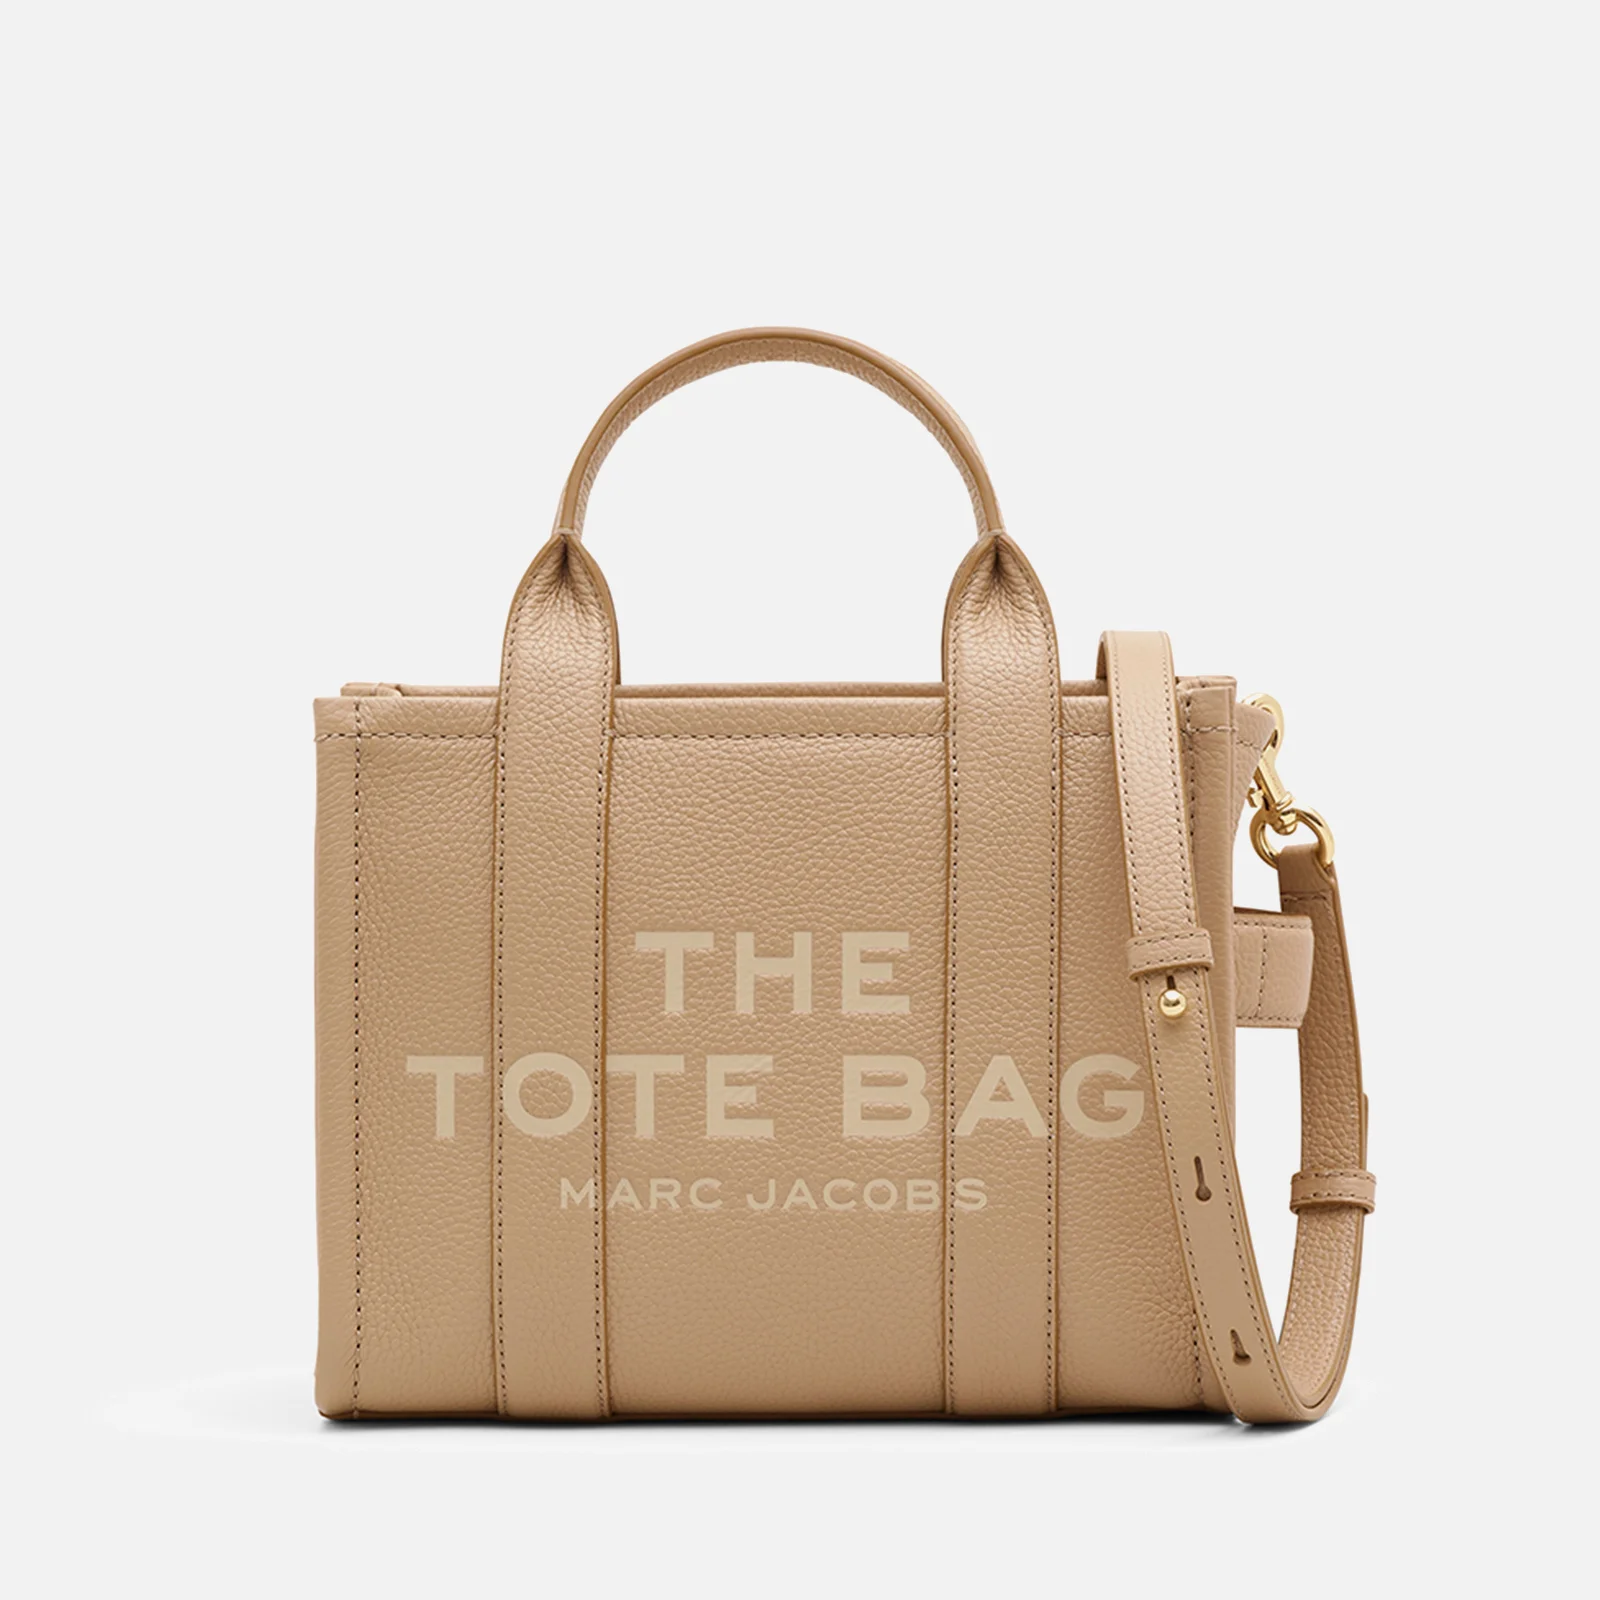 Marc Jacobs The Tote Bag in Grained Leather Small Image 1